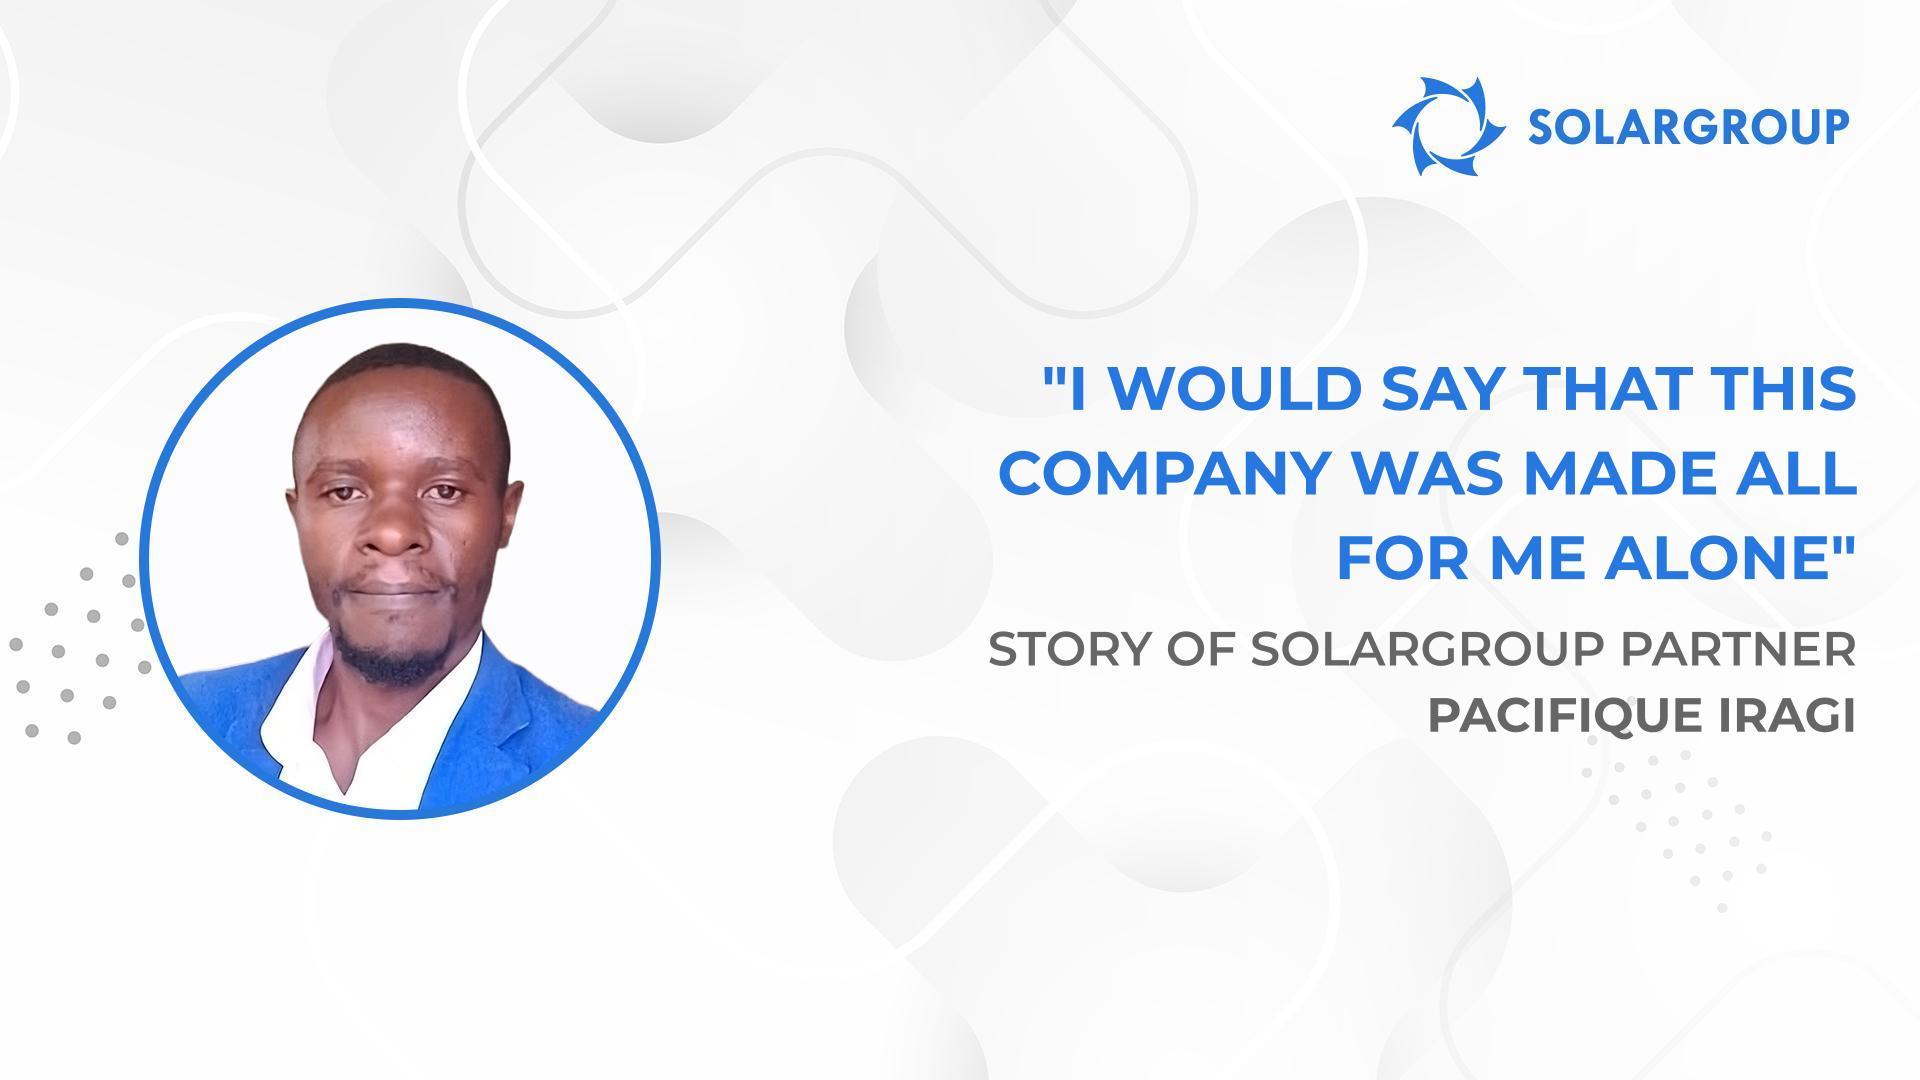 Thanks to SOLARGROUP I do not fear the future | Story of SOLARGROUP partner Pacifique Iragi